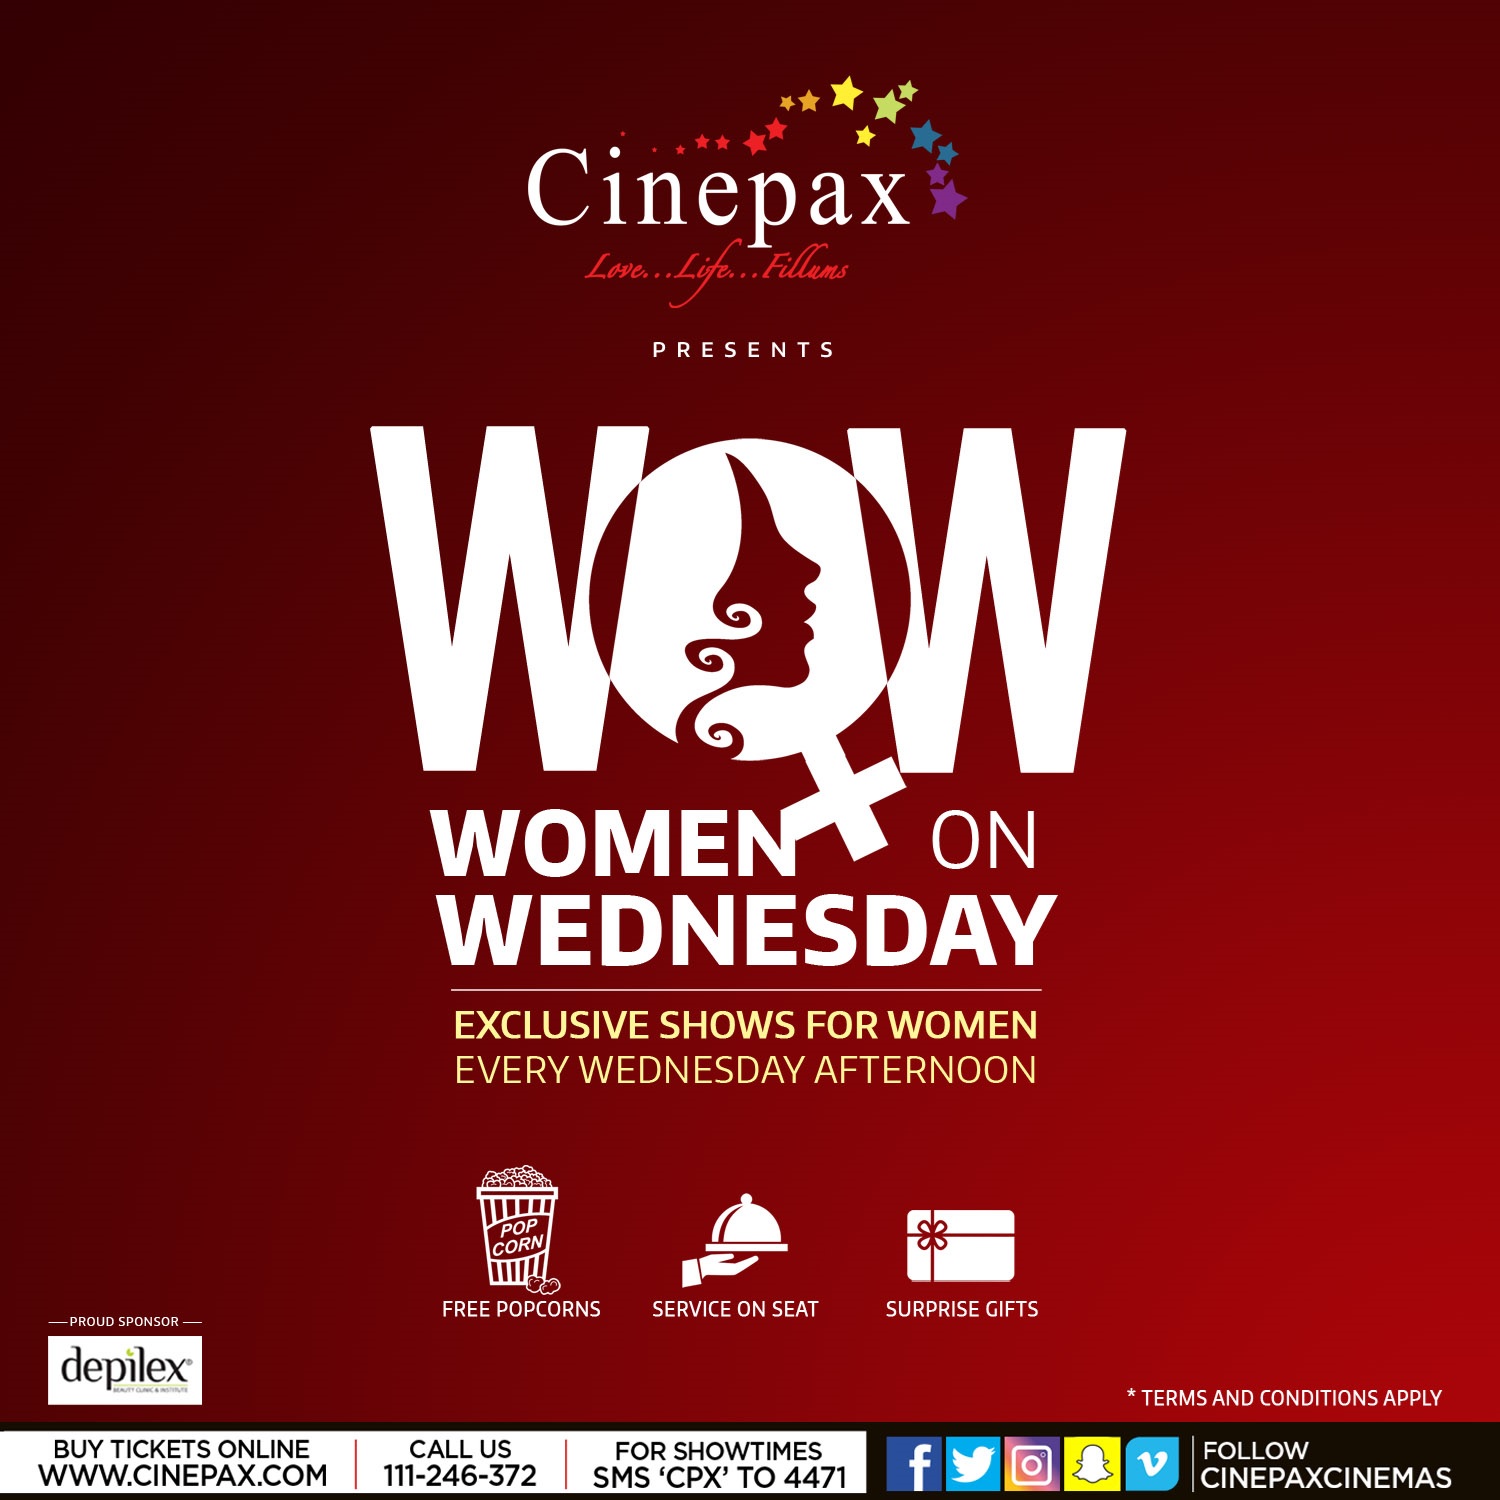 [Press Re;ease] Cinepax Cinema launches Women's only movie offer in collaboration with Depilex Group.jpg